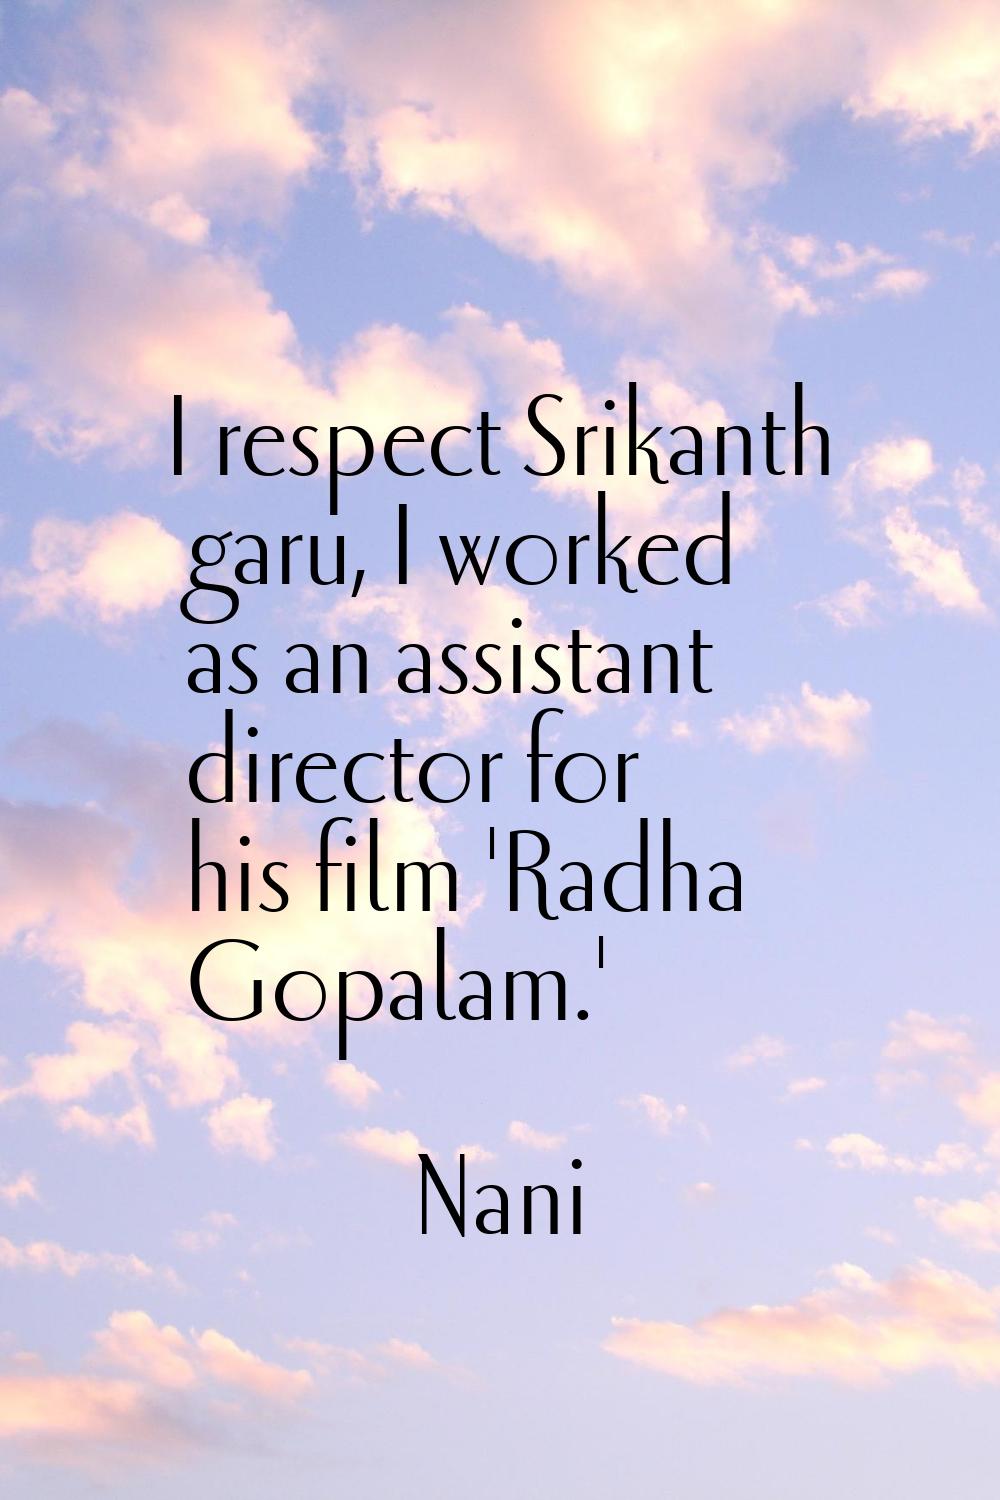 I respect Srikanth garu, I worked as an assistant director for his film 'Radha Gopalam.'